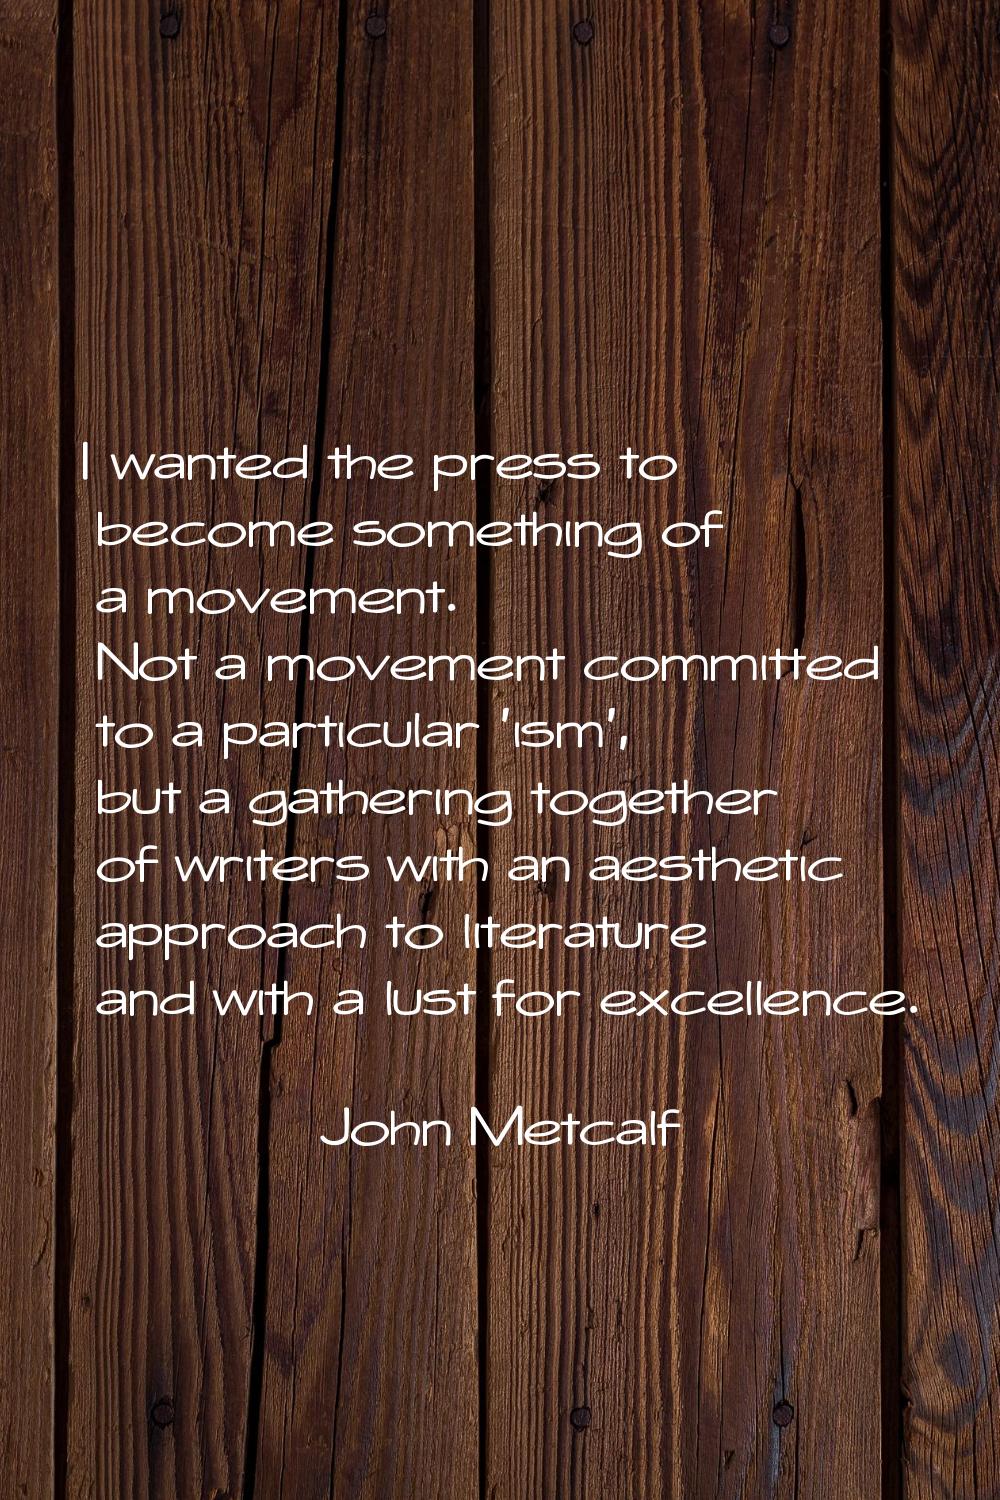 I wanted the press to become something of a movement. Not a movement committed to a particular 'ism